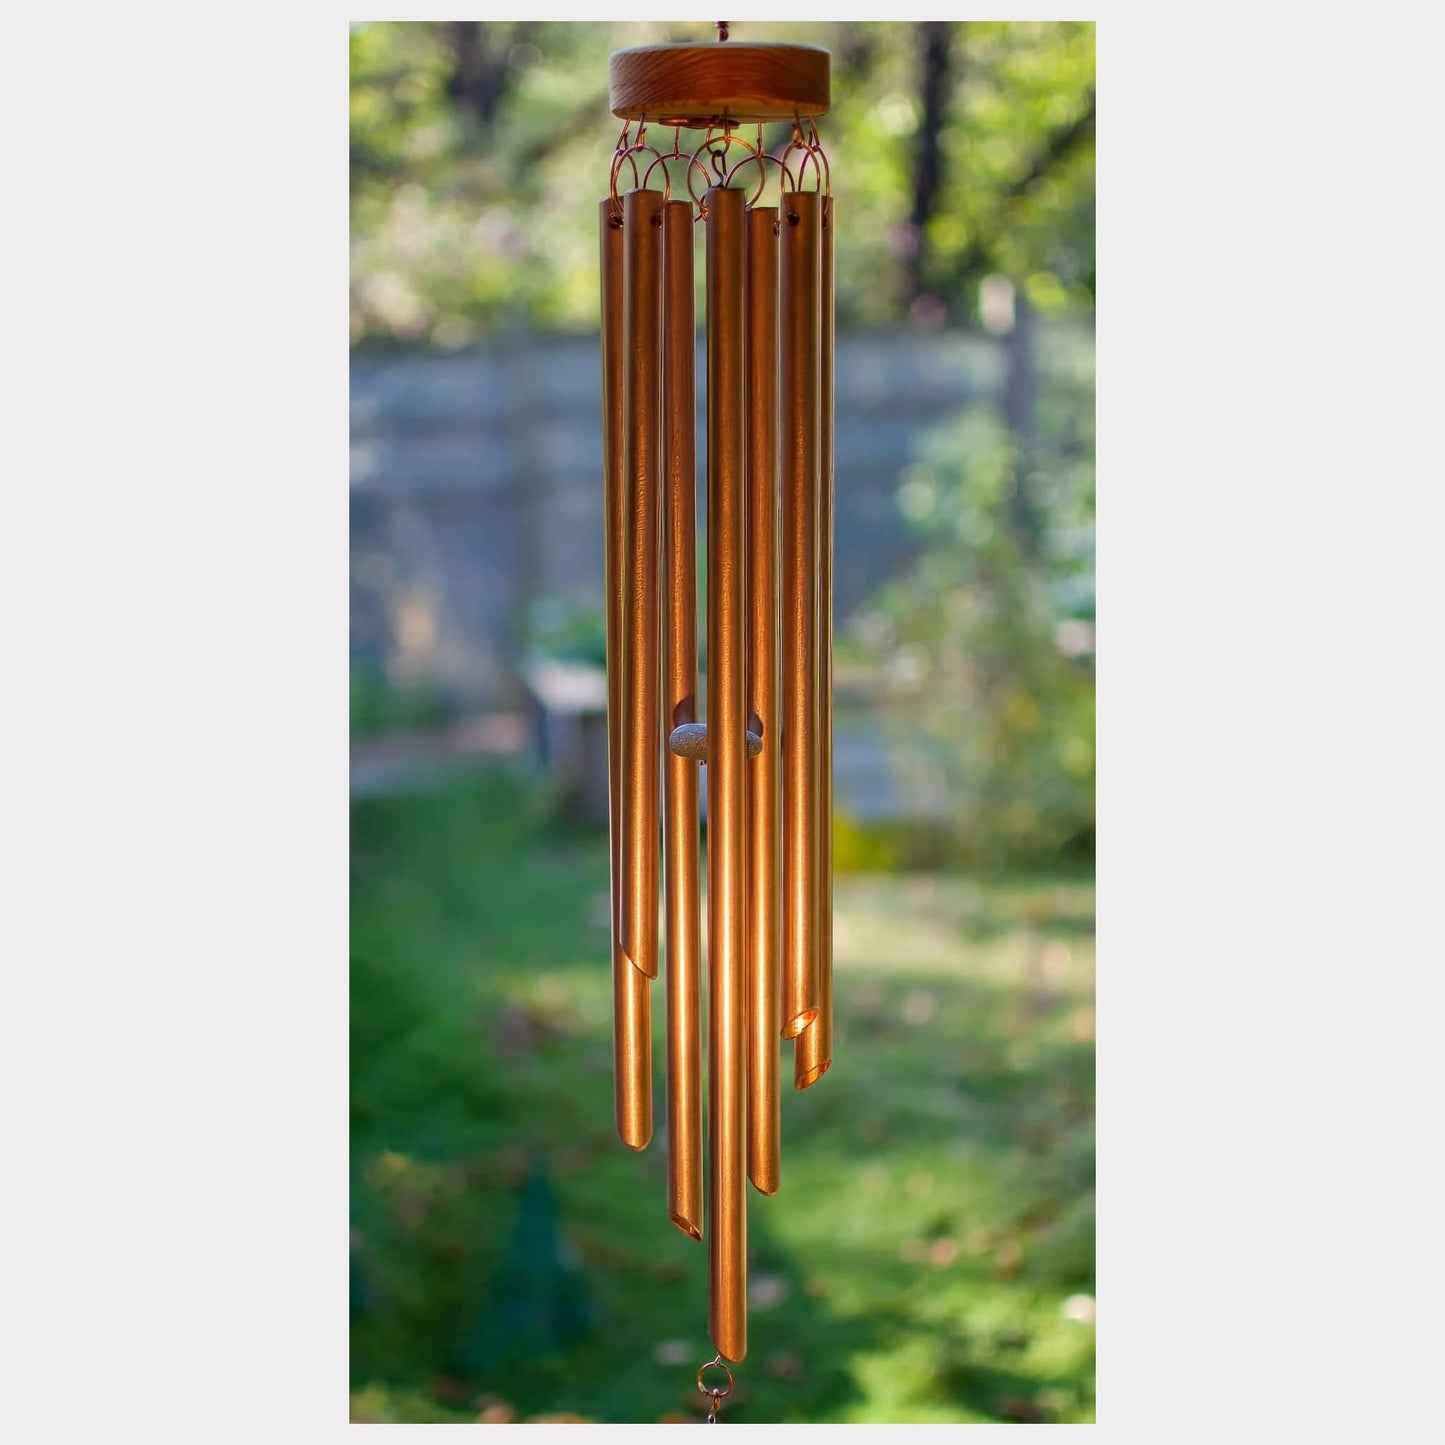 Genuine copper handcrafted wind chime.